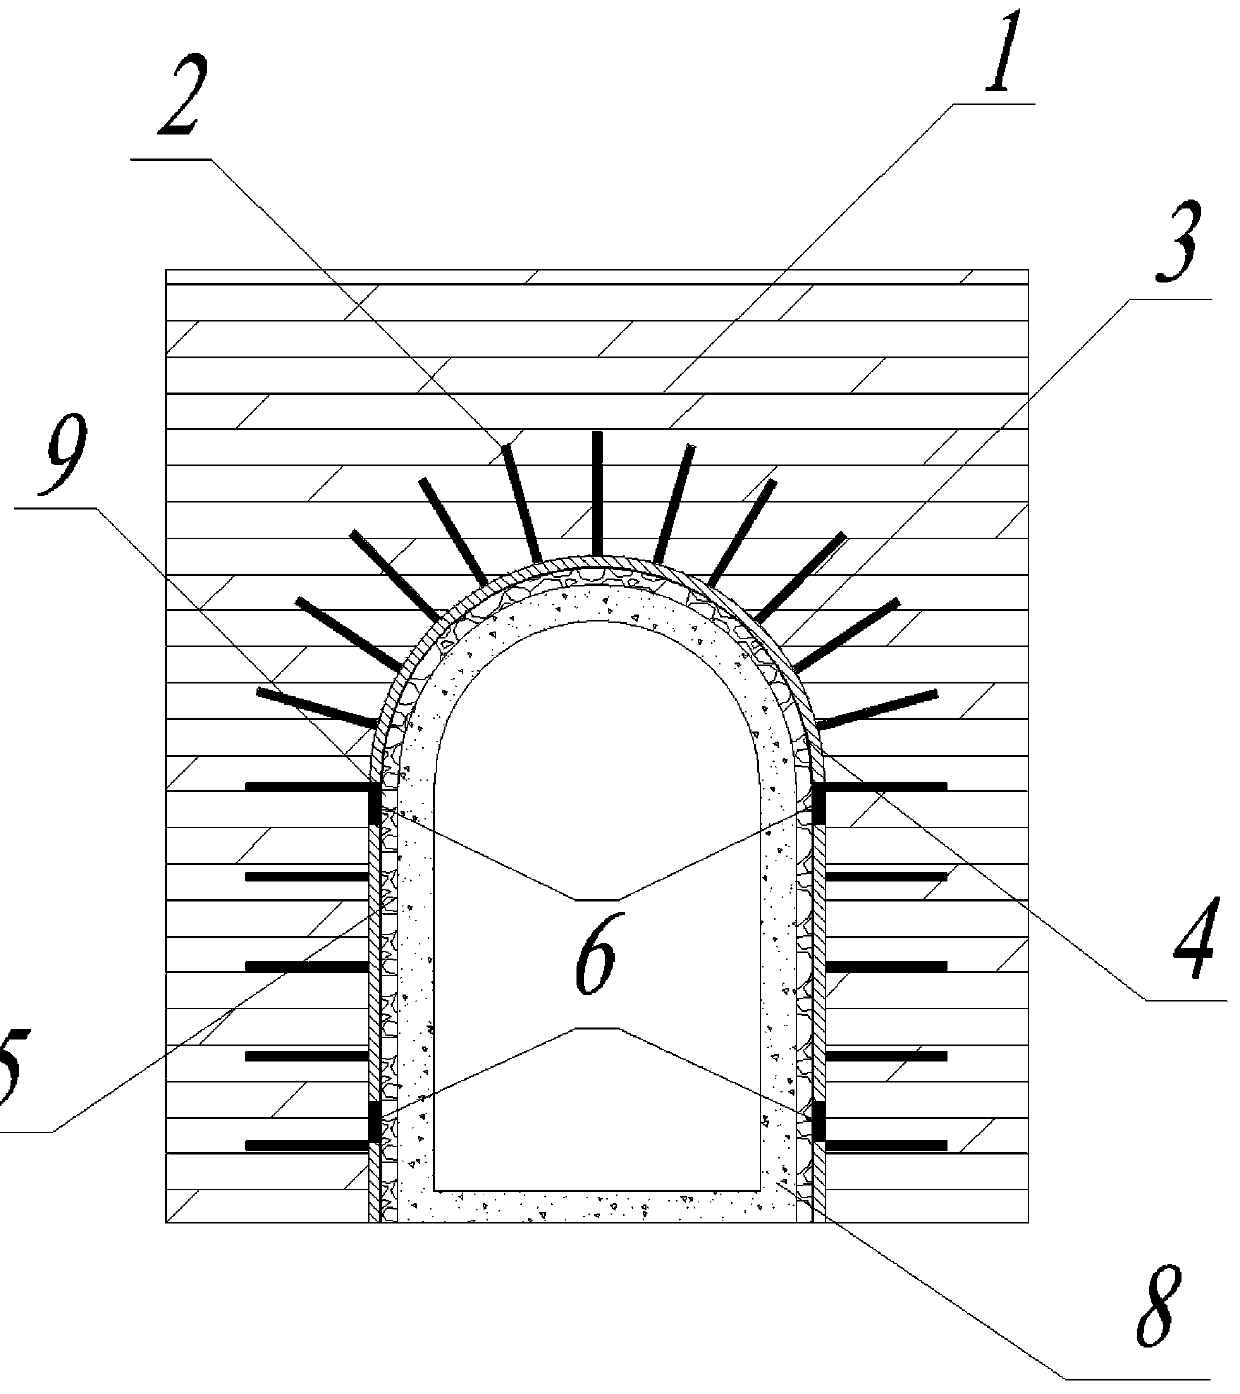 A tunnel lining structure and construction method filled with ceramsite